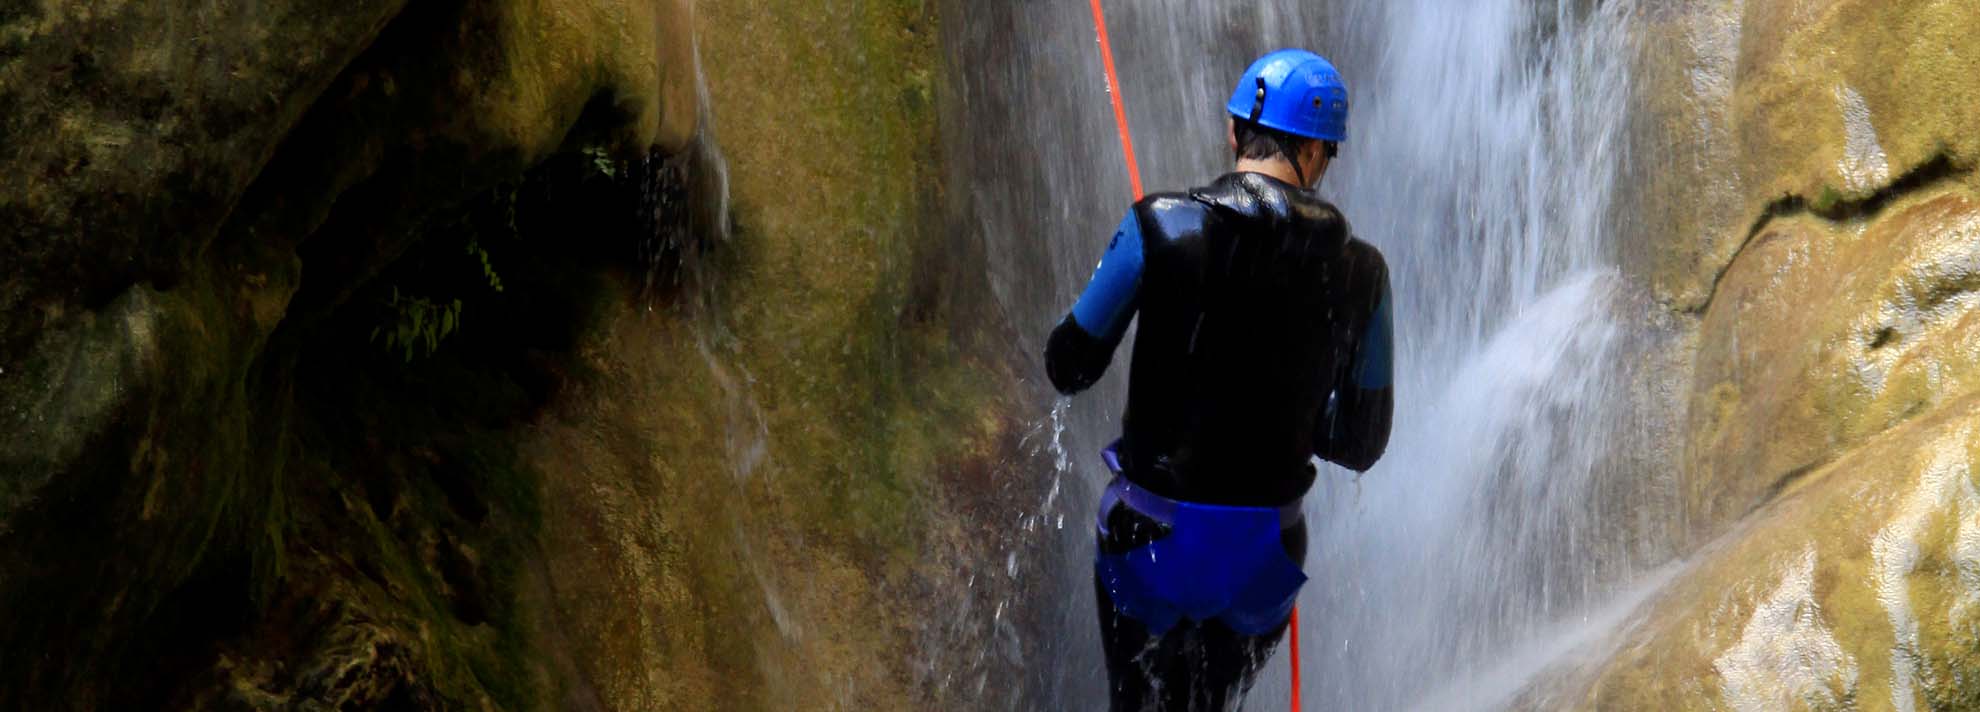 Villages and canyoning in the Ligurian Alps Park